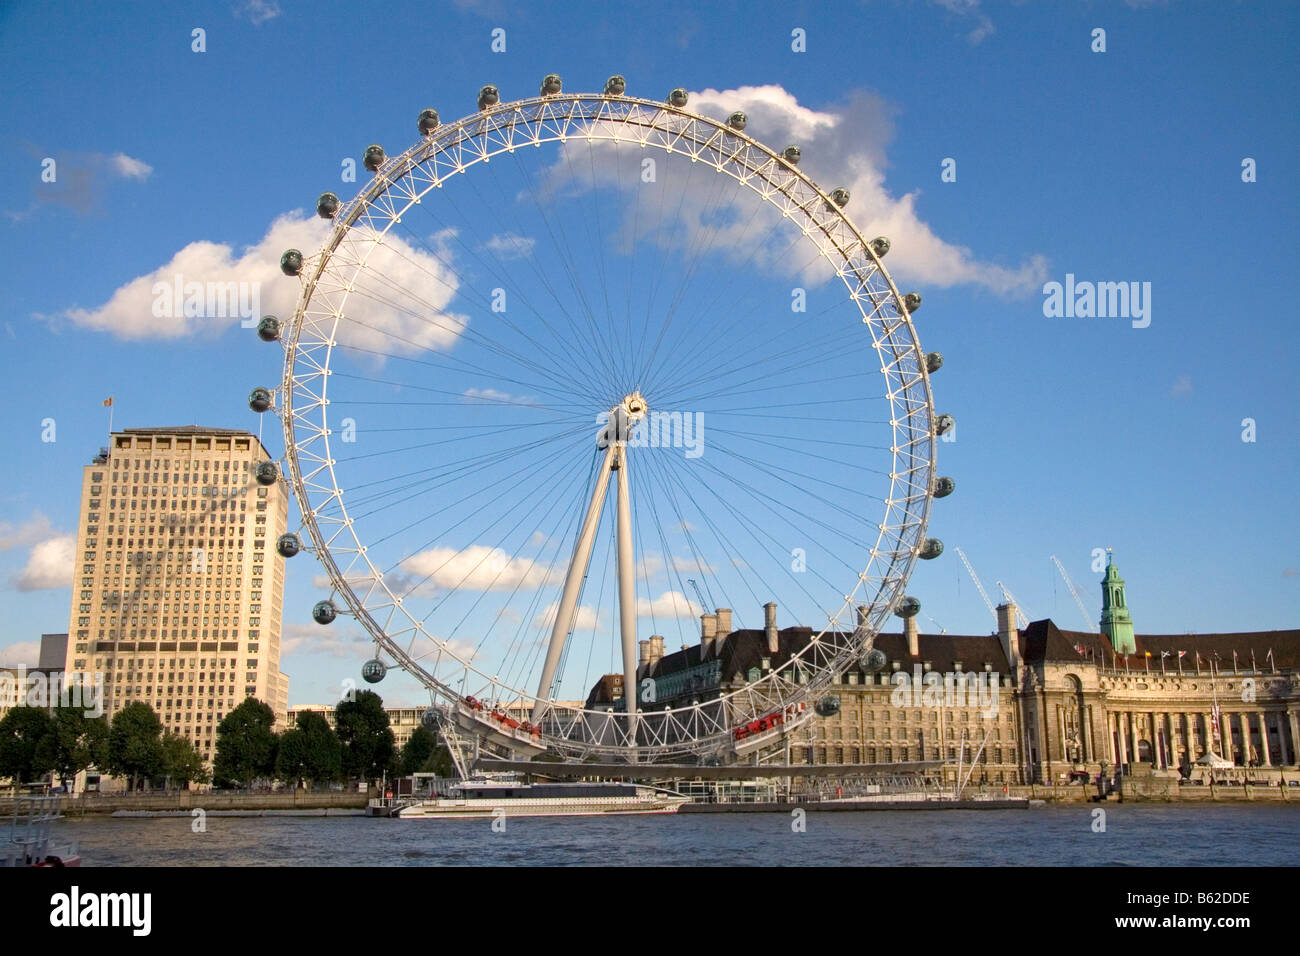 The London Eye along the River Thames in the city of London England Stock Photo